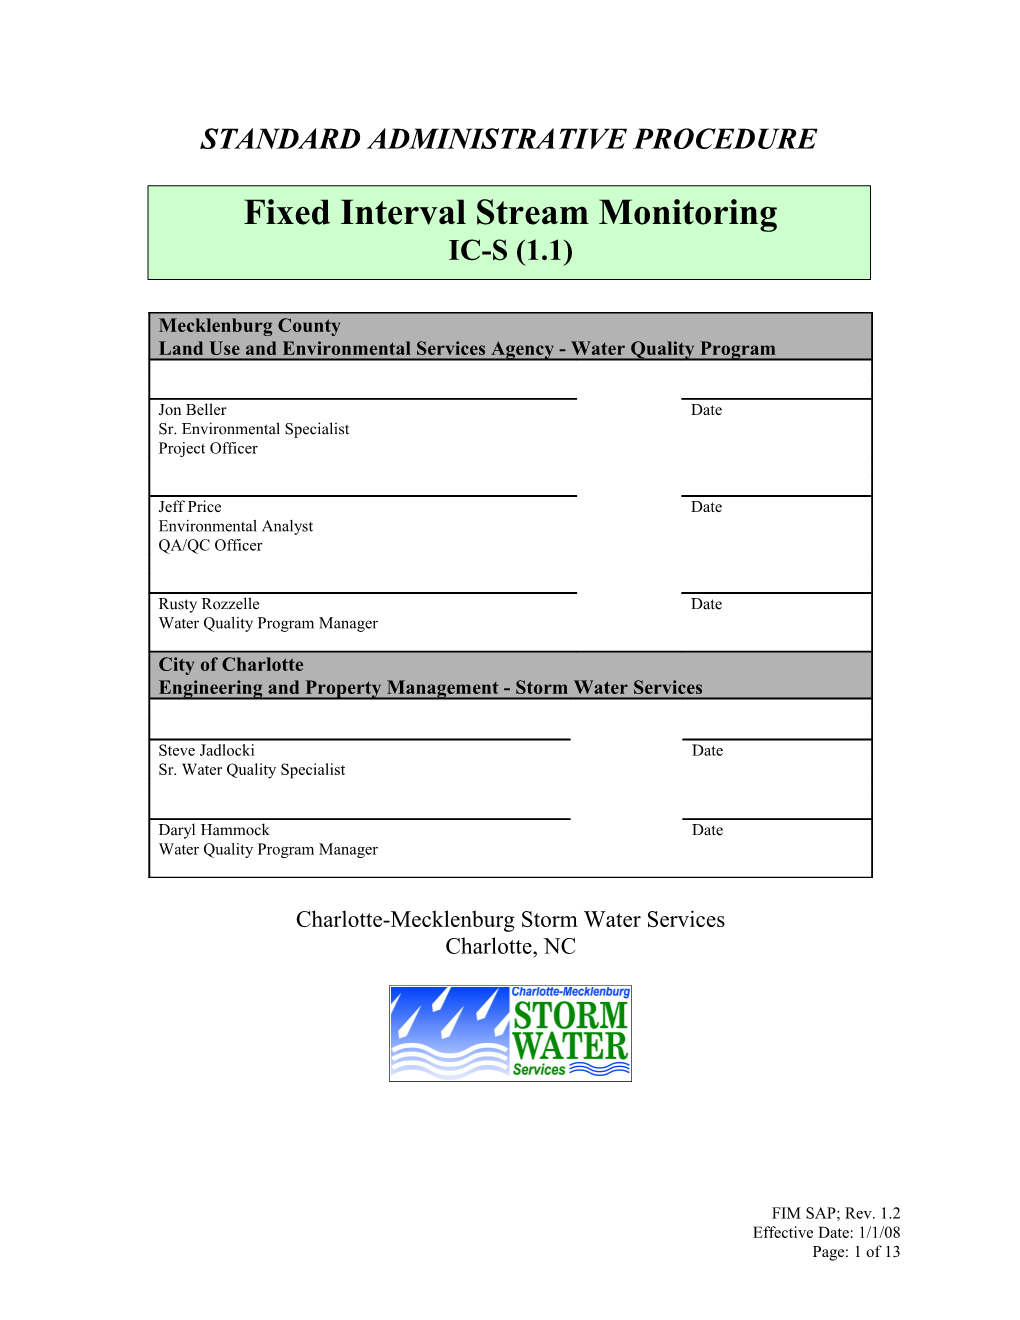 Fixed Interval Monitoring Procedure